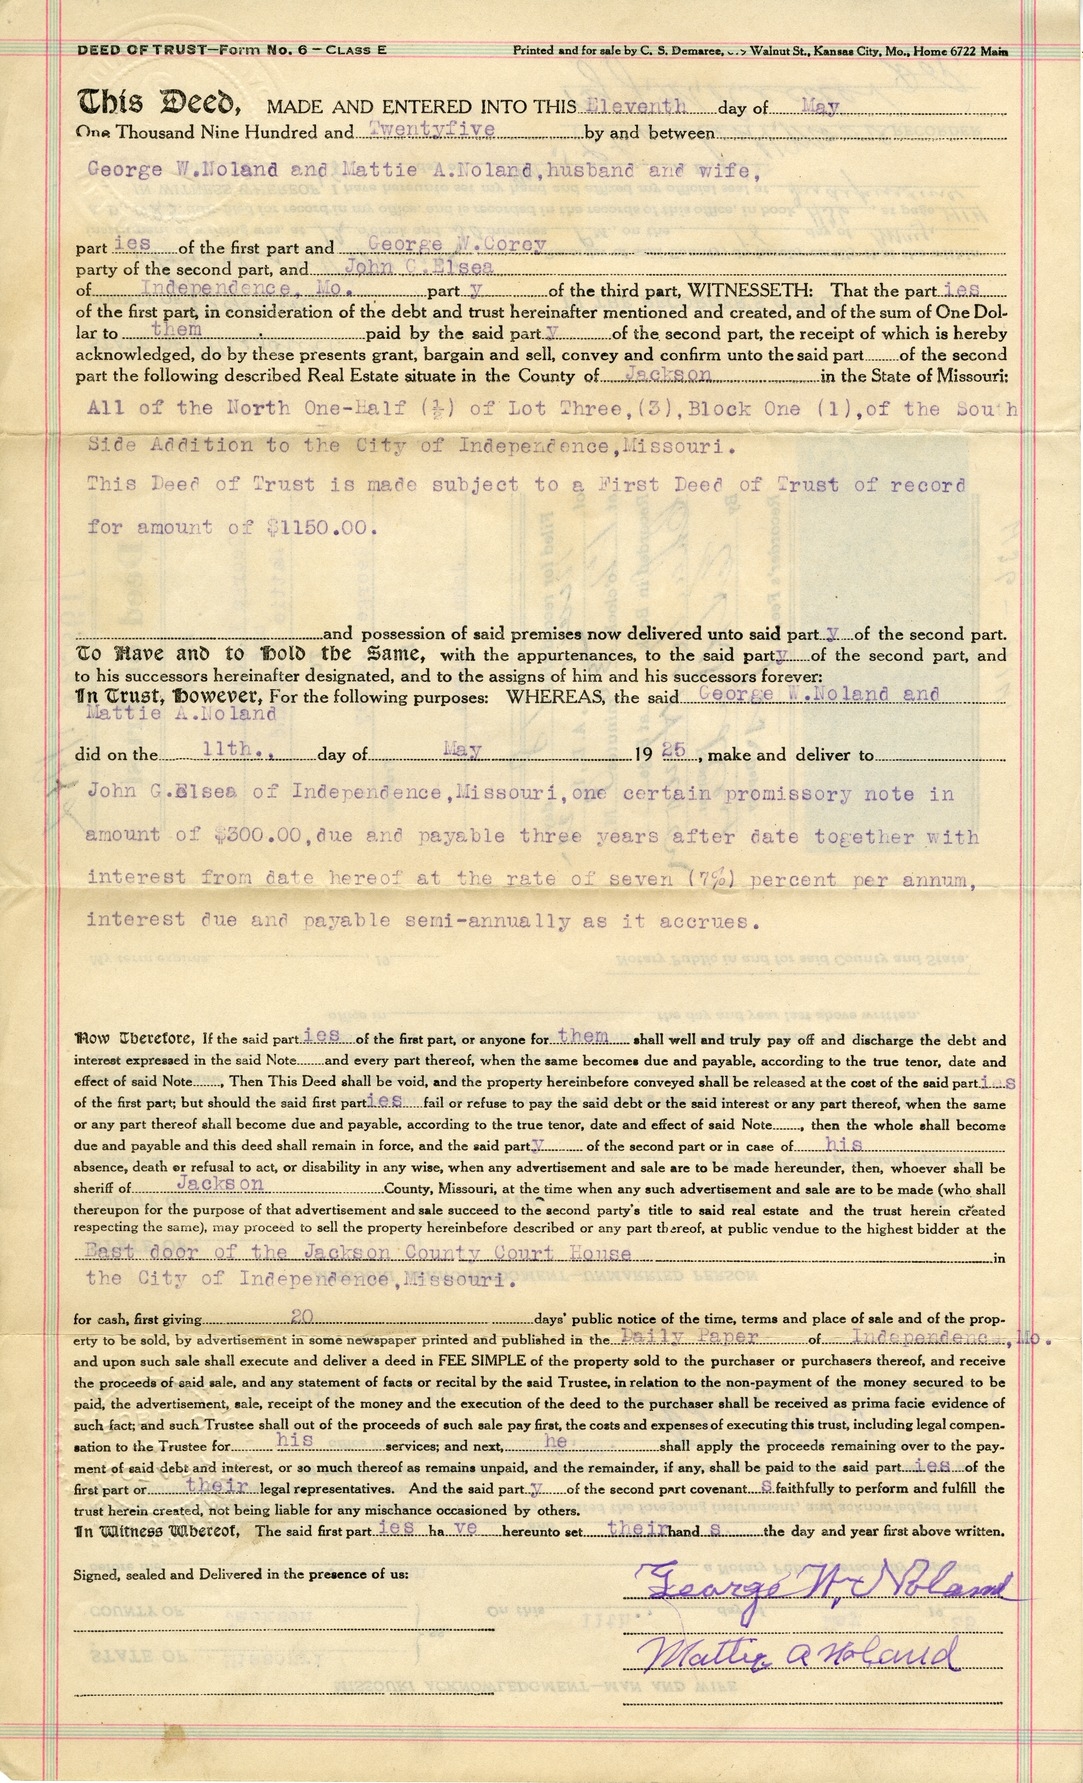 Deed of Trust from George W. Noland and Mattie A. Noland to George W. Corey for John C. Elsea